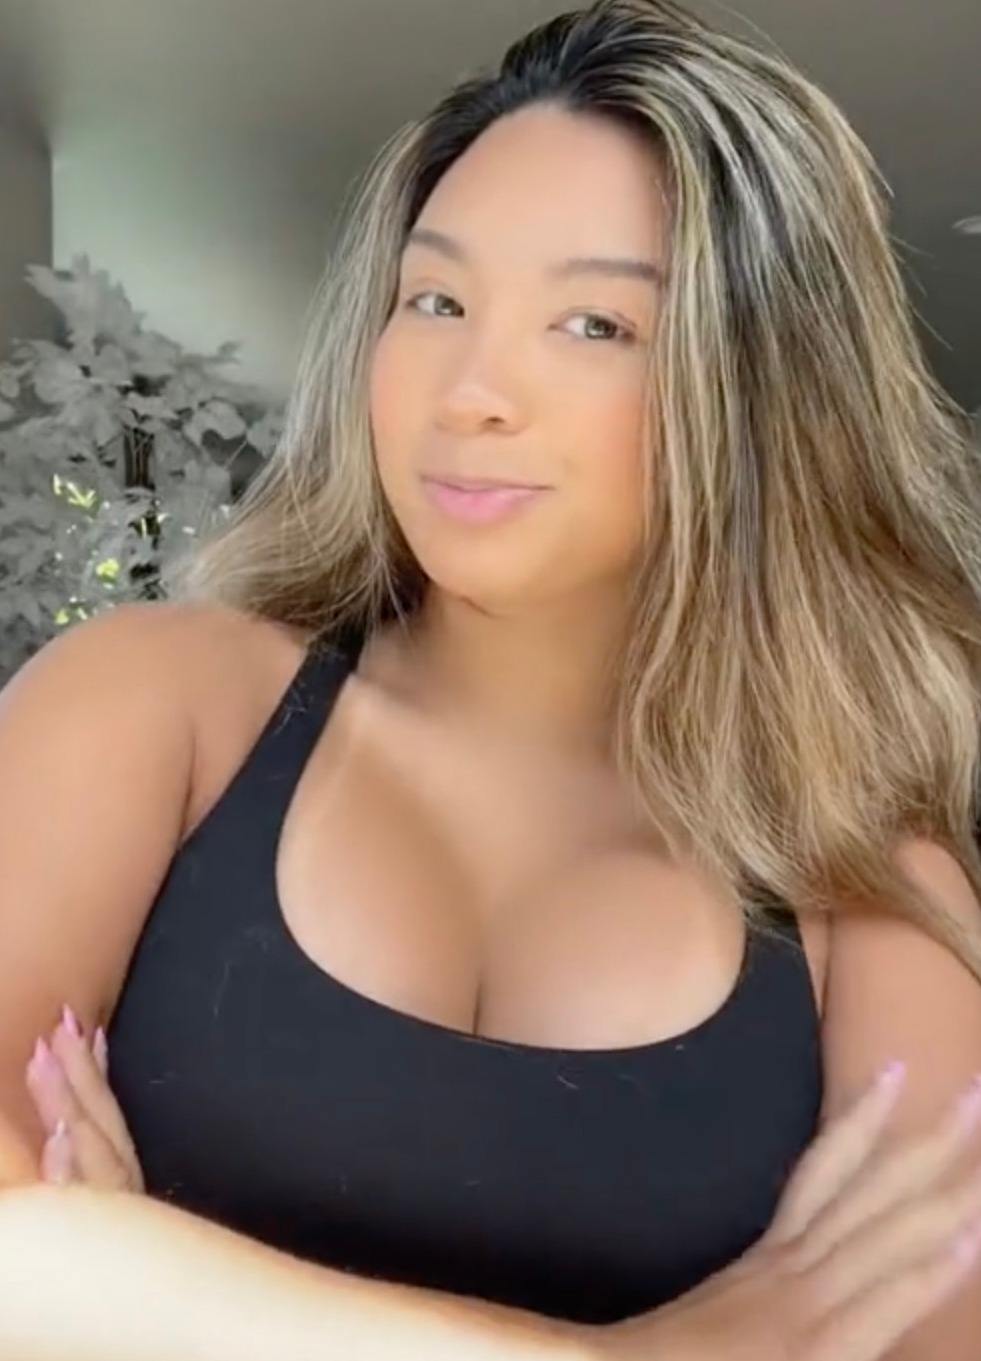 abigail ervin recommends how to flex your boobs pic